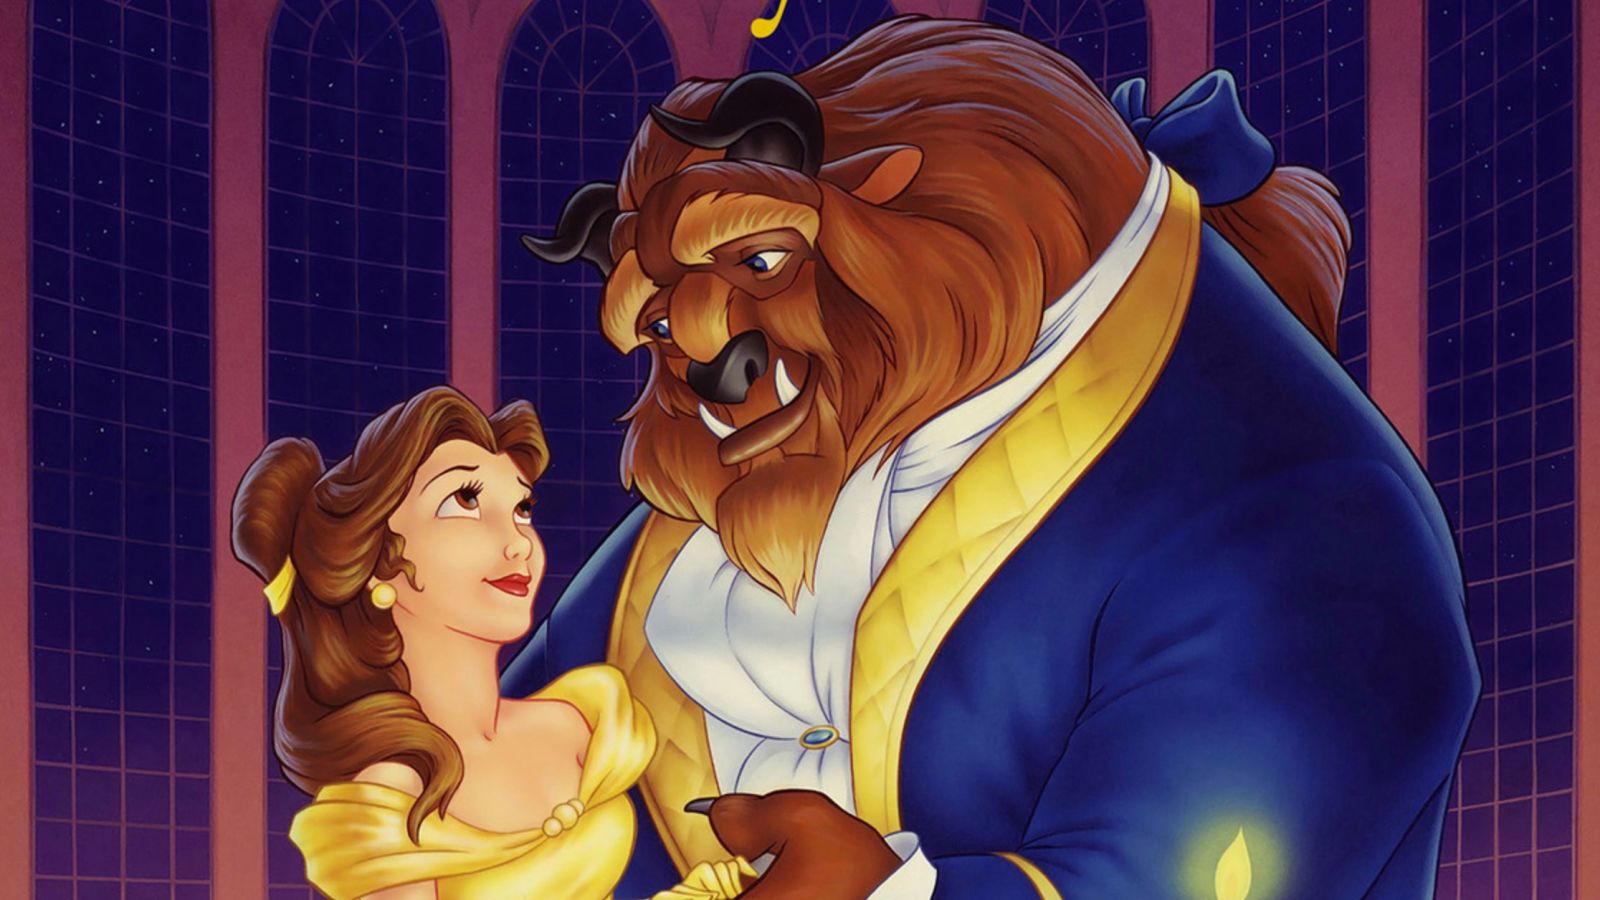 Beauty and the Beast 30th Anniversary Special.